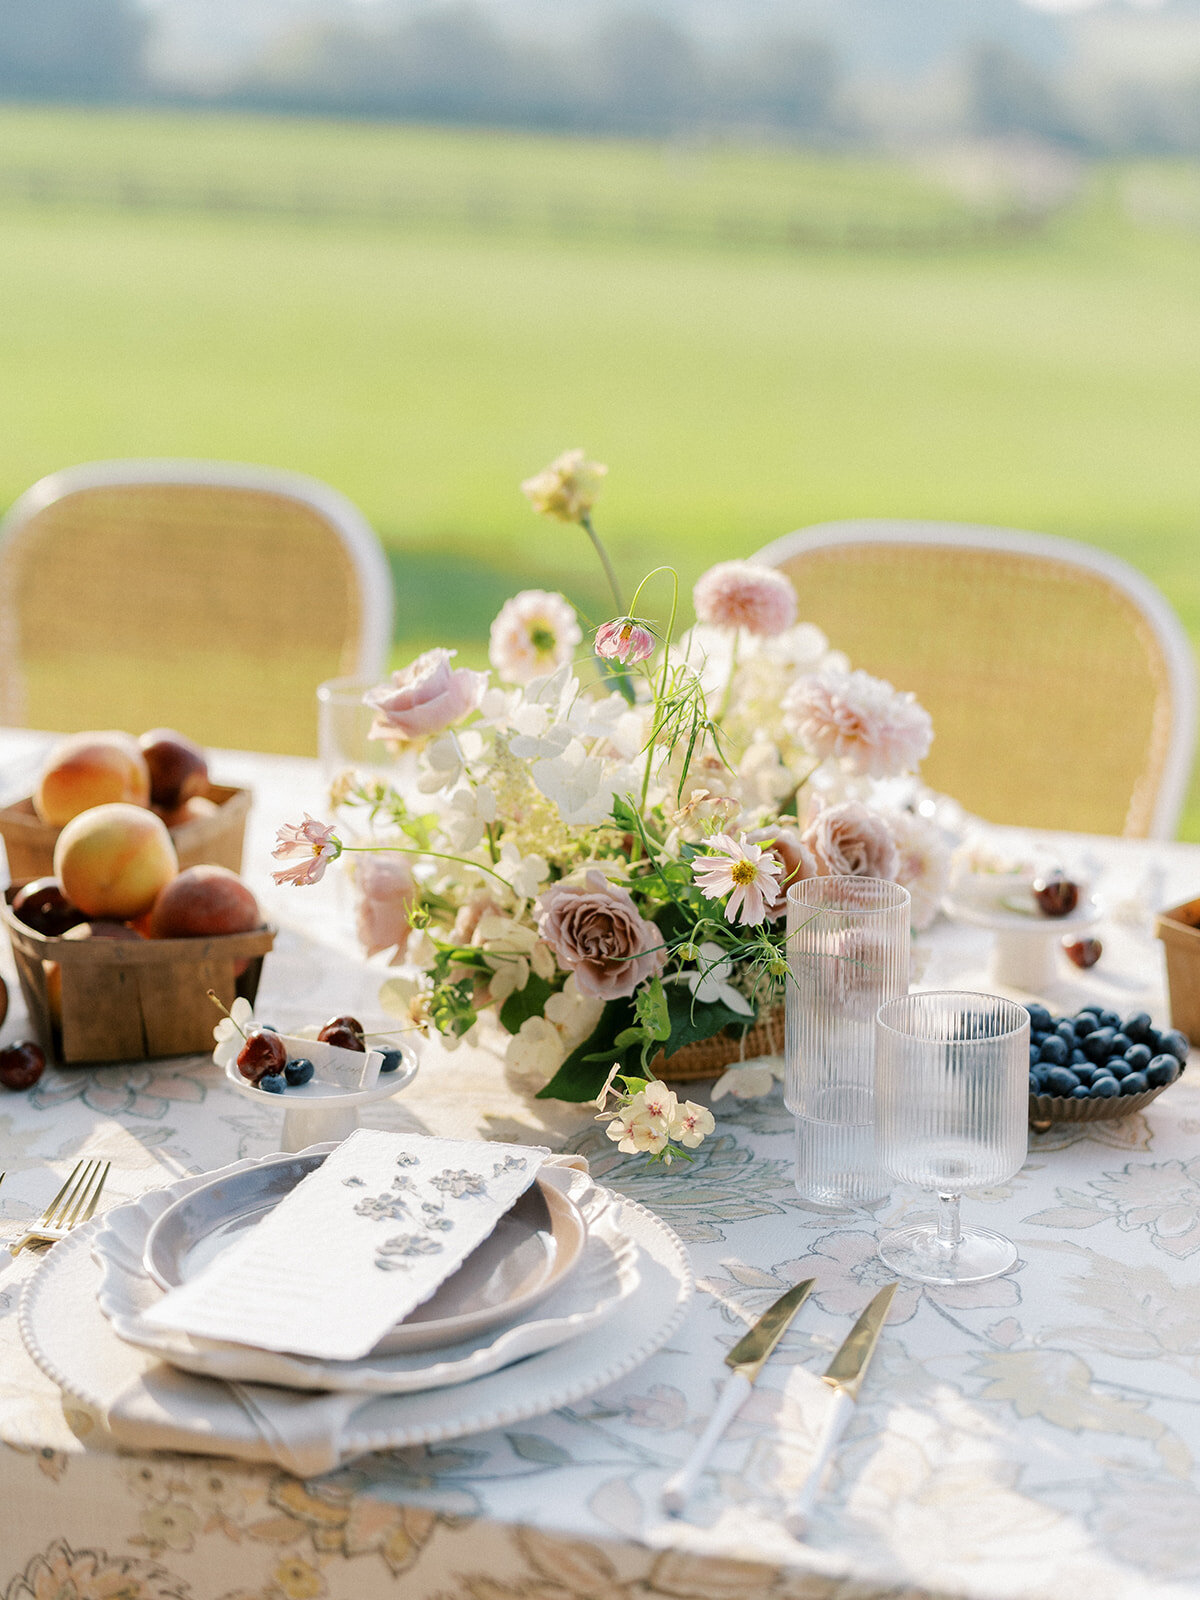 Table setting on top of a floral-patterned linen, with fresh fruit and wispy floral compotes going down the length of the table including taupe and blush garden roses, white hydrangea, brown lisianthus, phlox and blush cosmos.